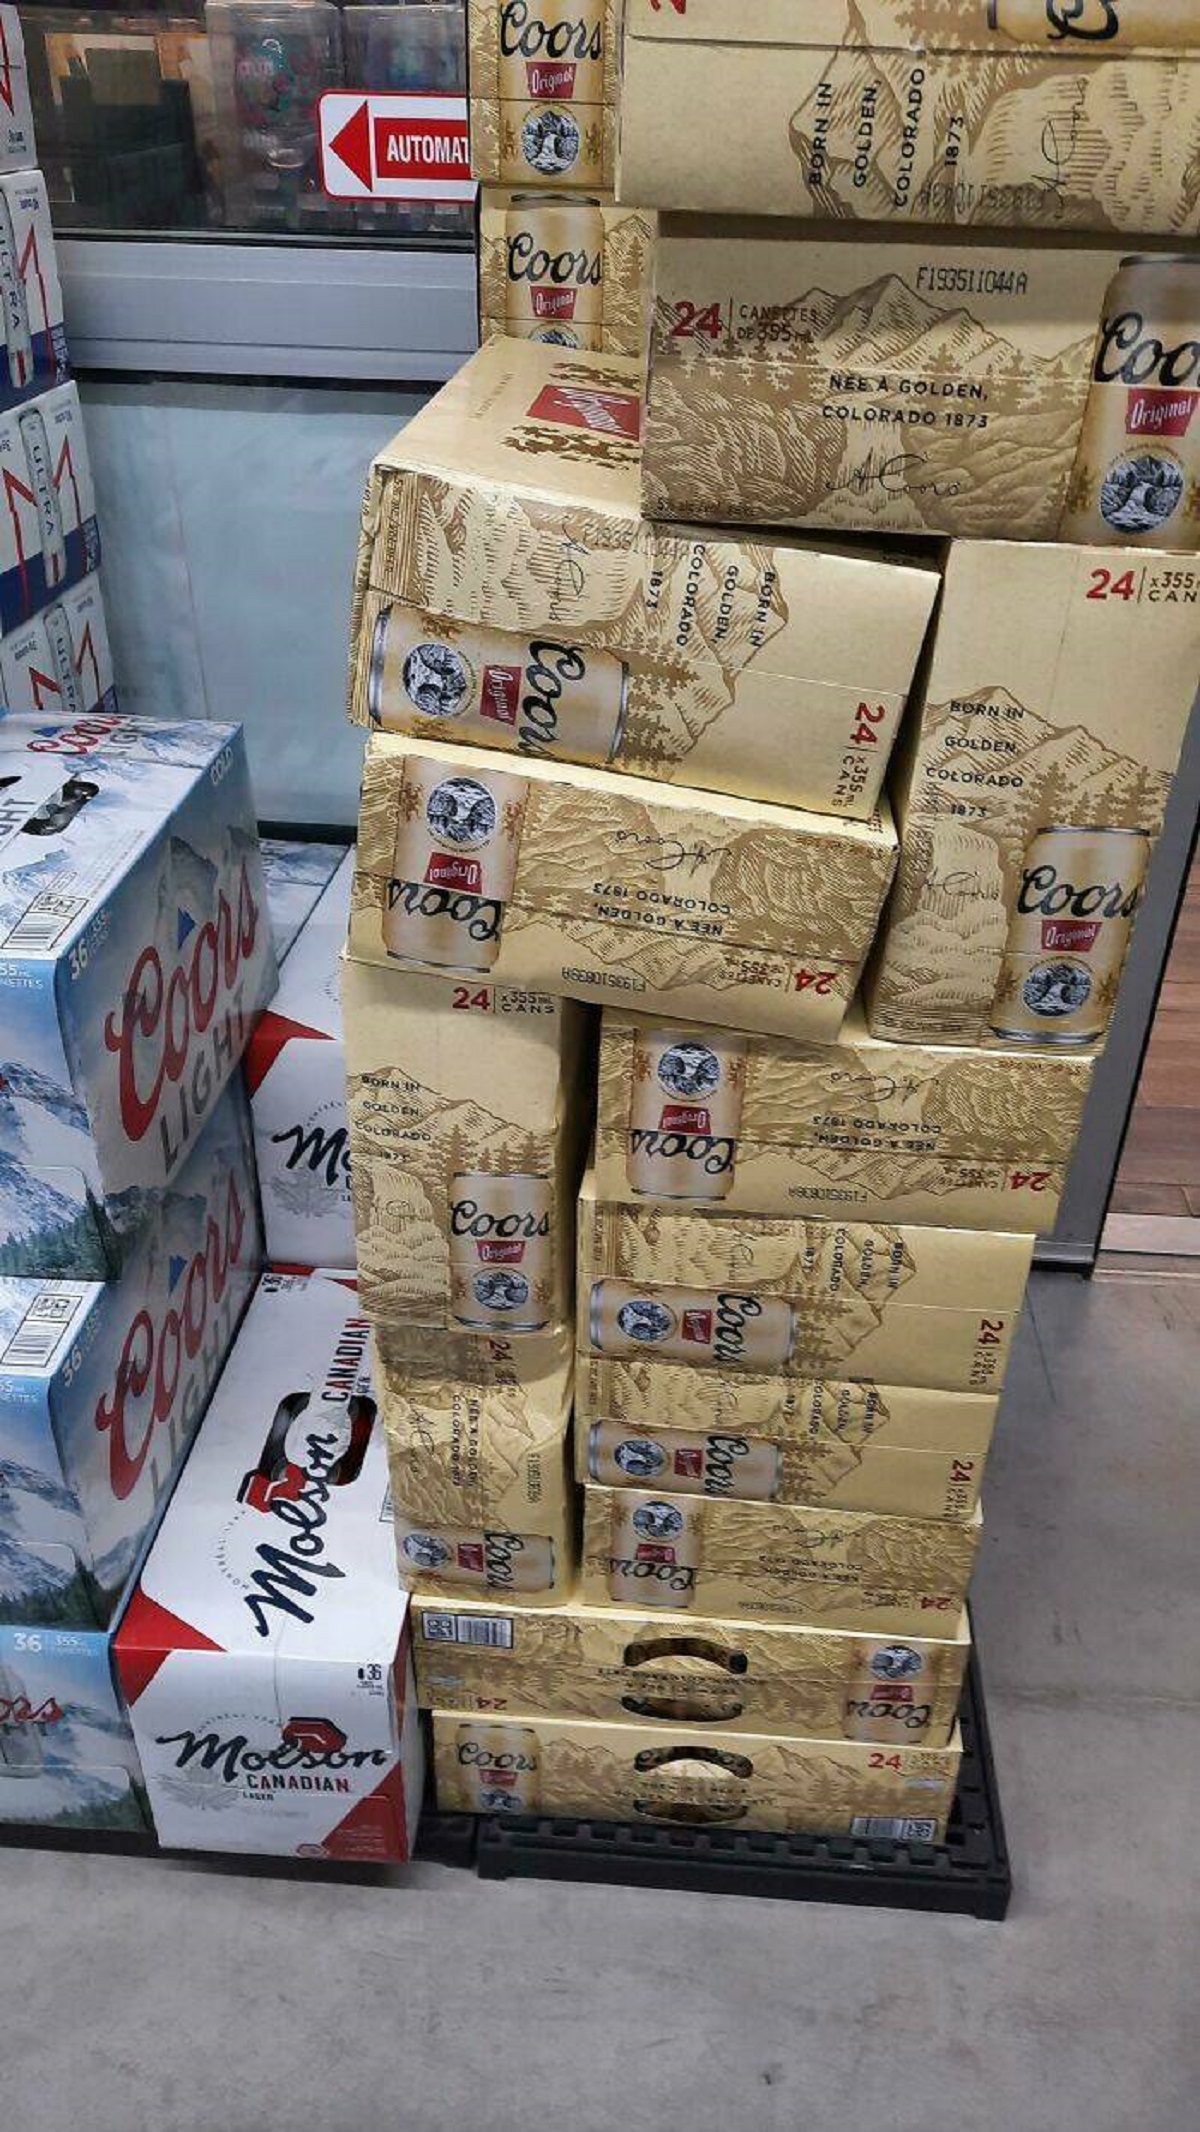 "The Way My Coworker Stacked This Beer"